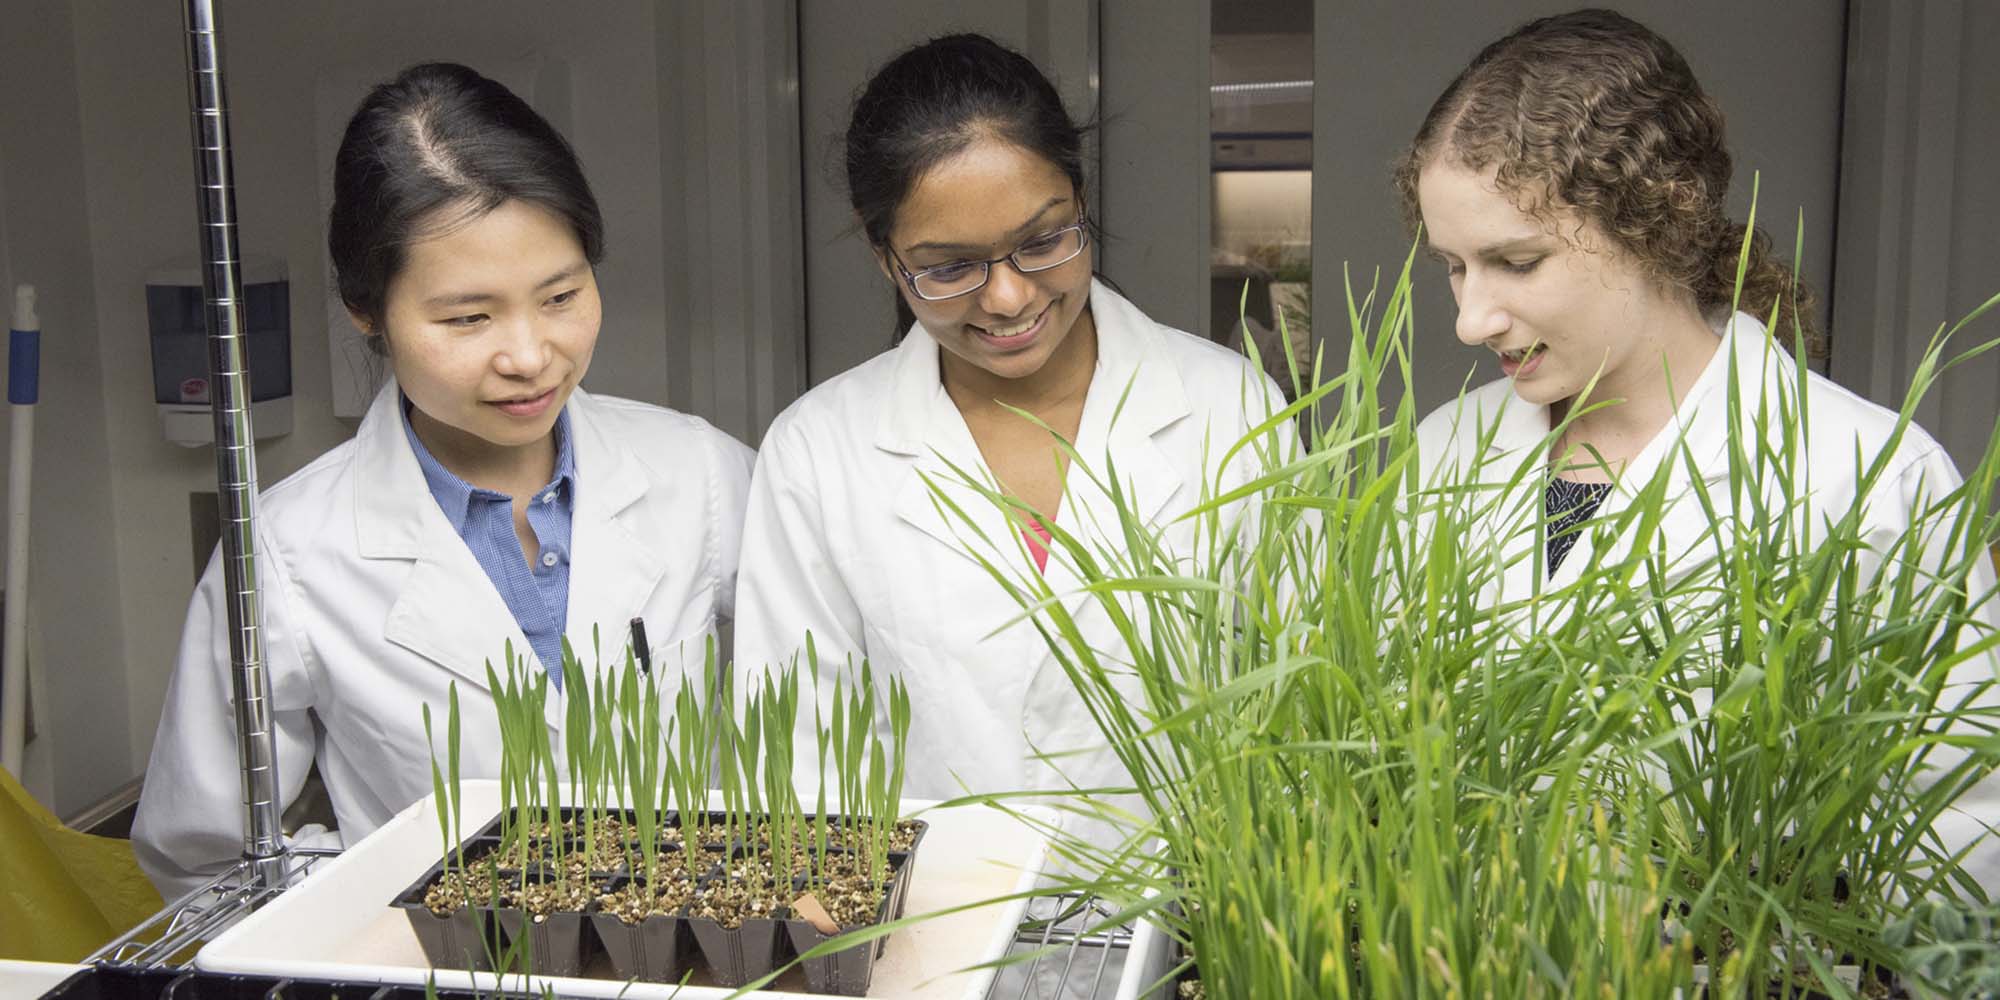 Grains being examined by a female researcher